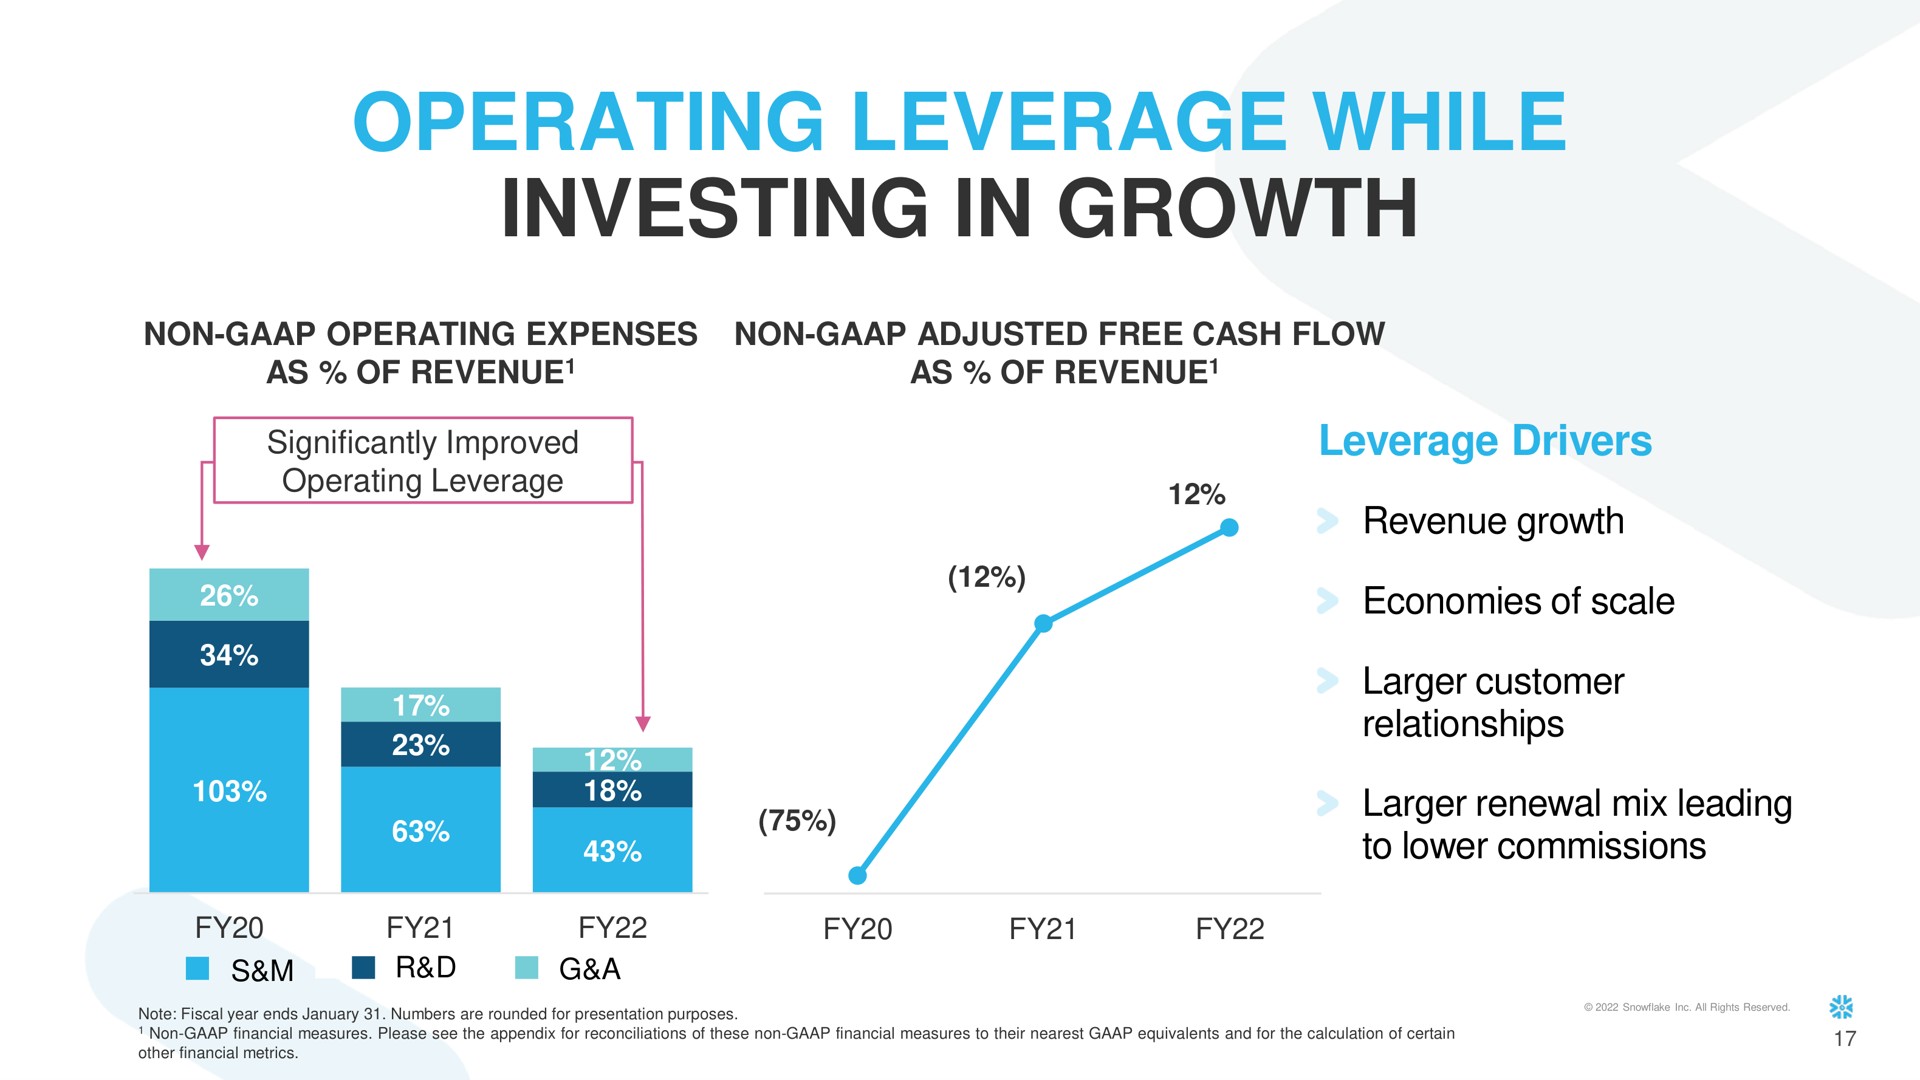 operating leverage while investing in growth ingrowth | Snowflake